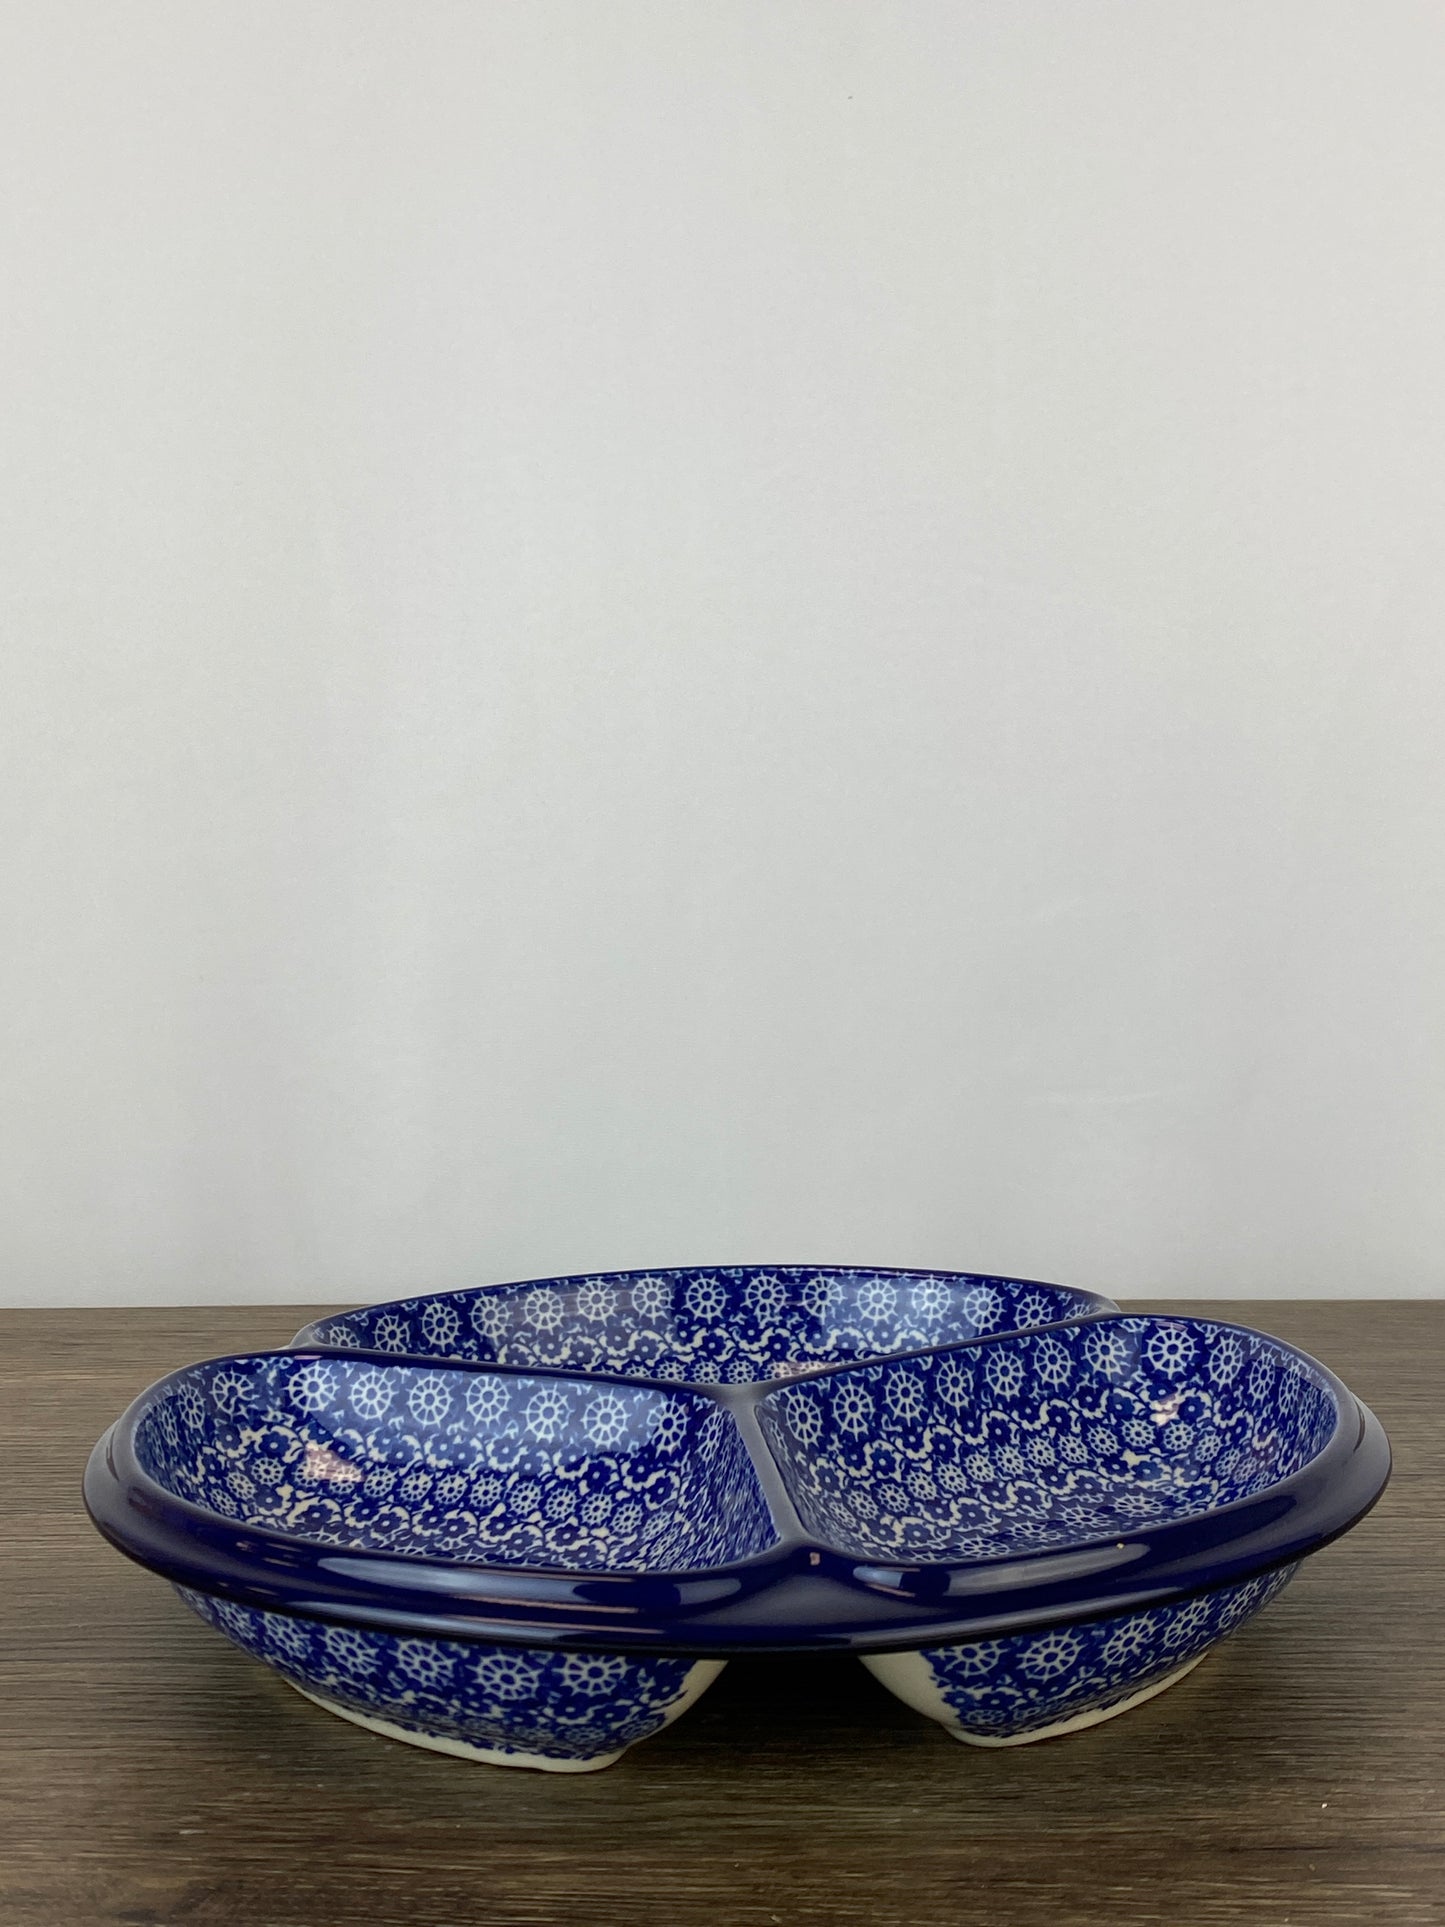 Divided Round Dish - Shape 484 - Pattern 2615